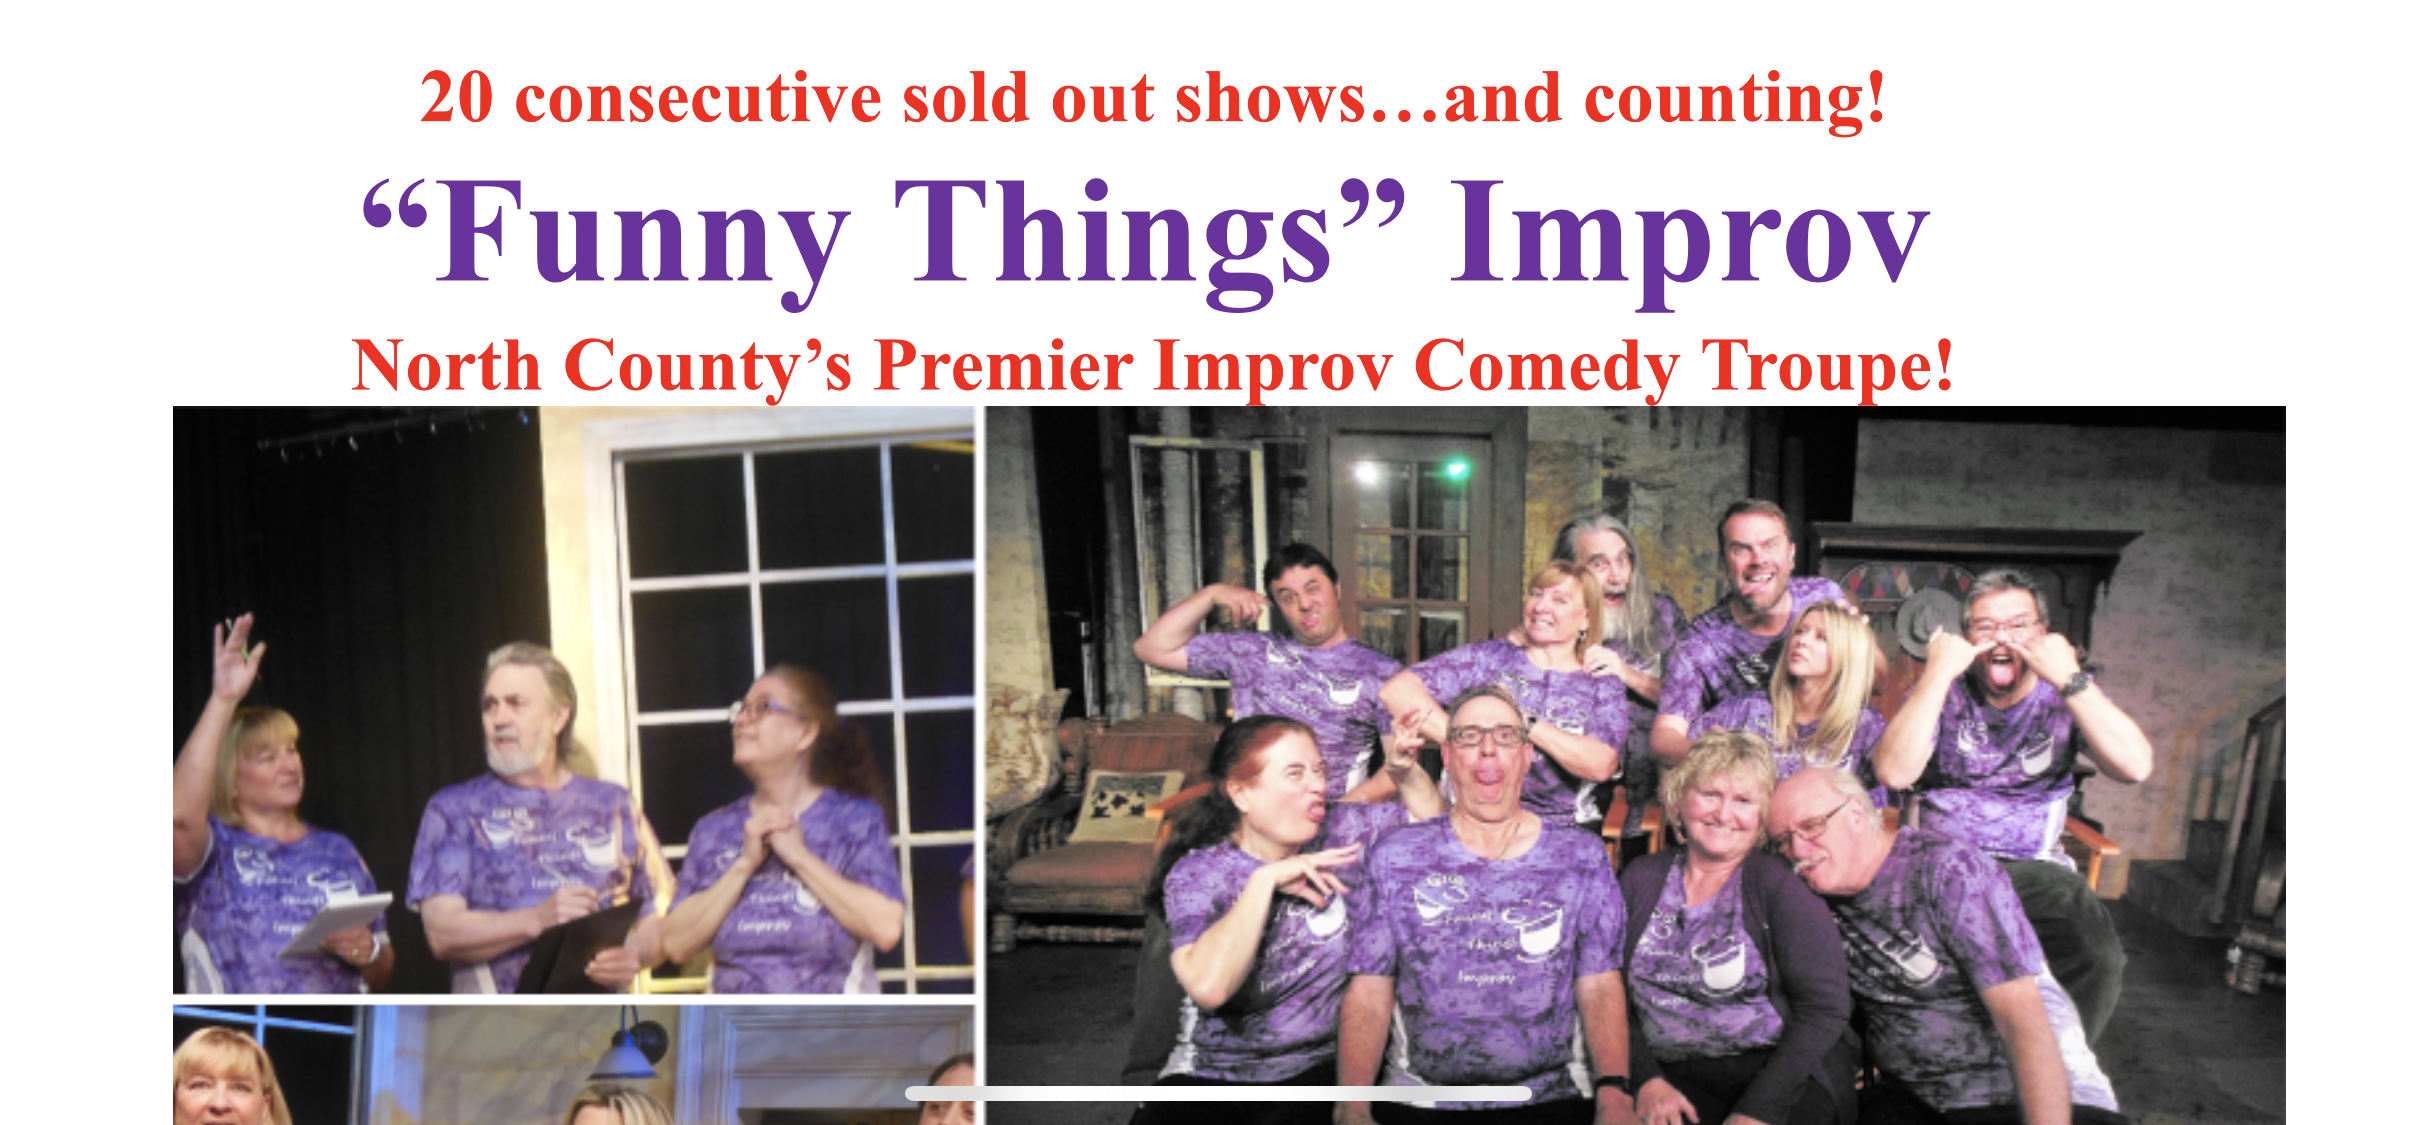 Funny Things Improv Comedy Show